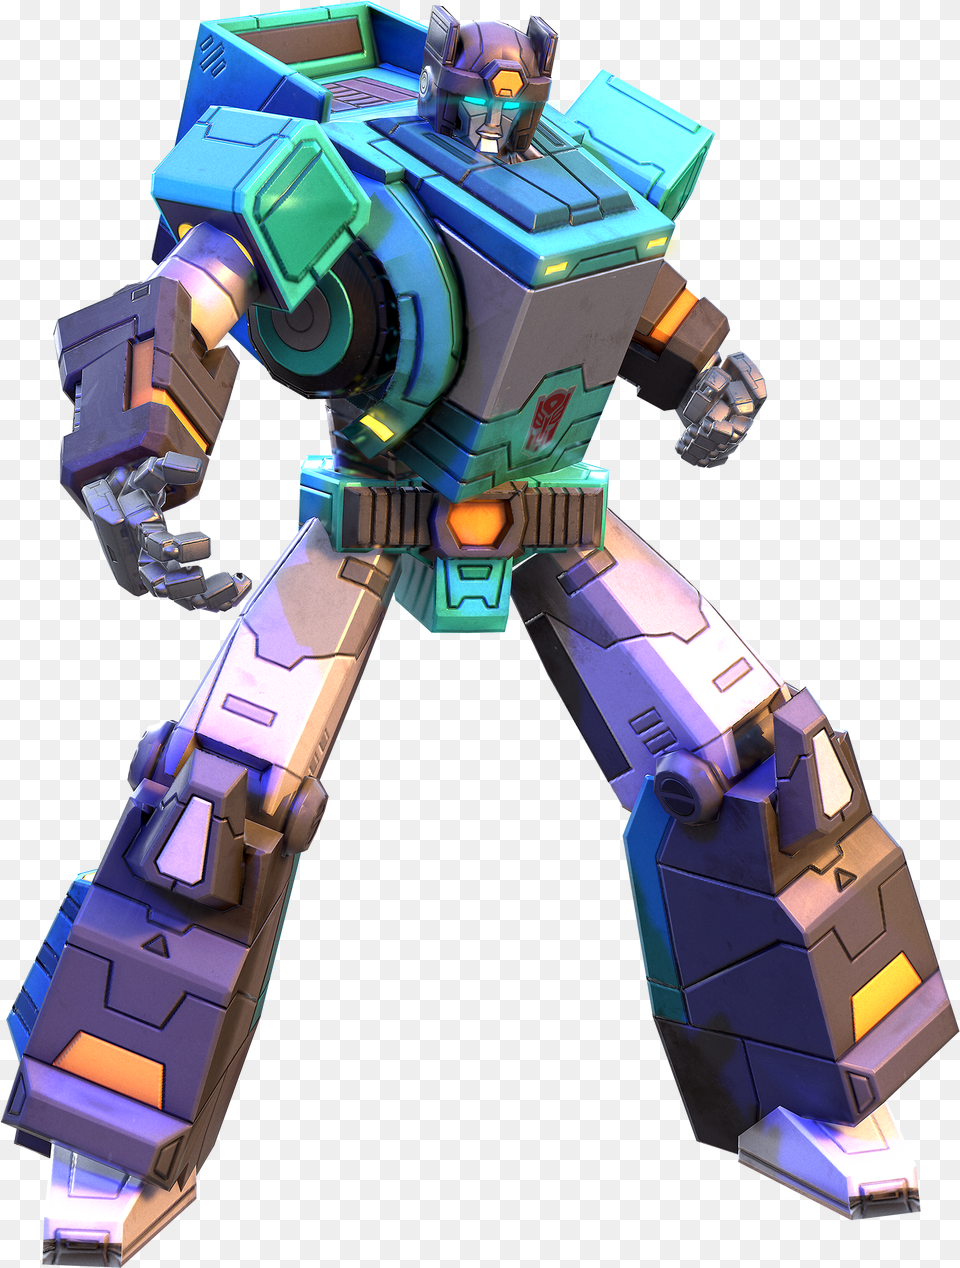 Earth Wars Event Transformers Earth Wars Autobots, Robot, Toy Png Image